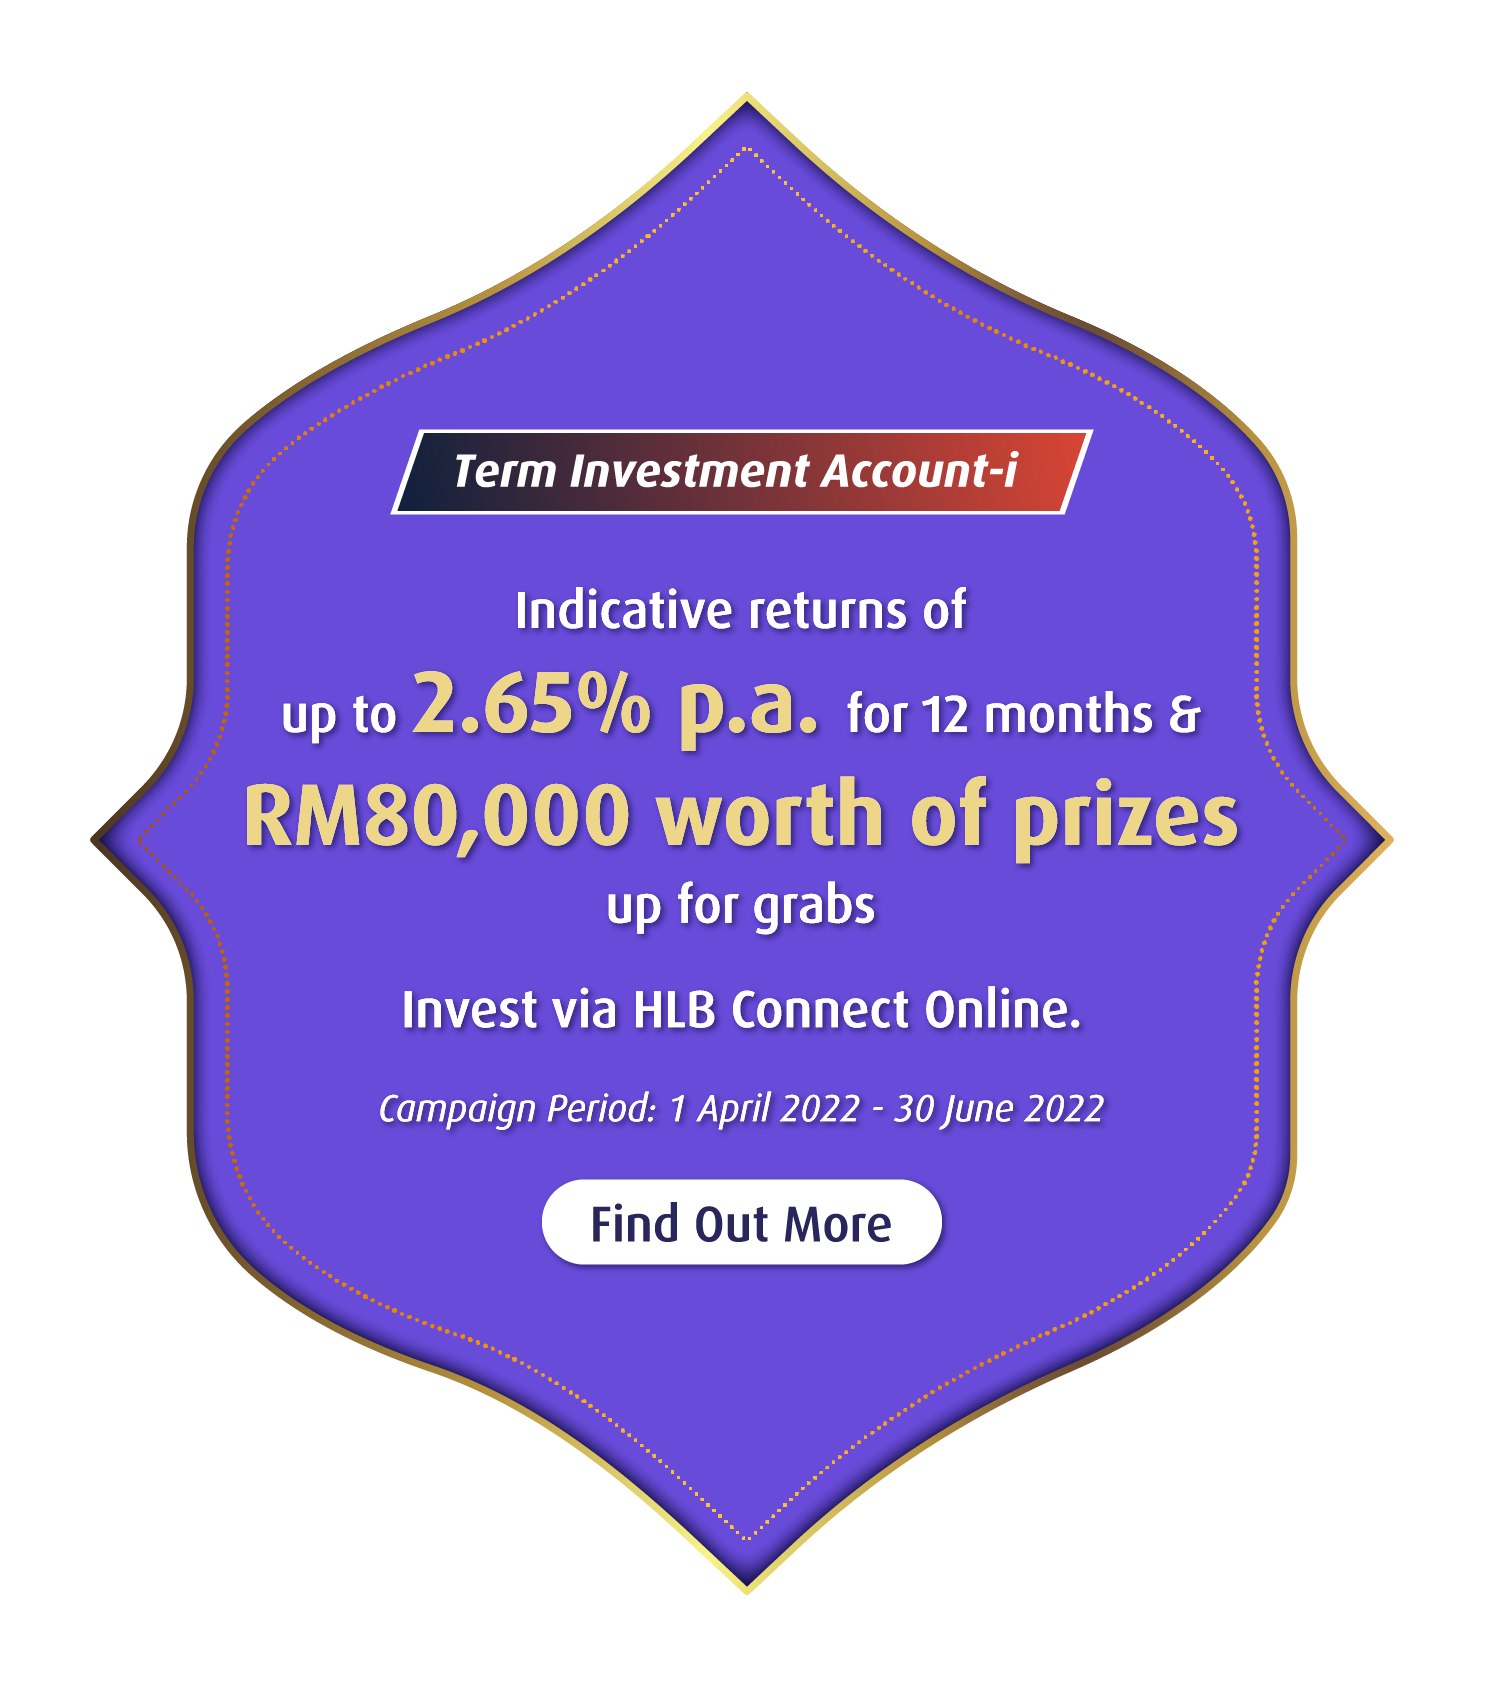 Term Investment Account-i Indicative returns of up to 2.55% p.a. for 12 months & RM80,000 worth of prizes up for grabs